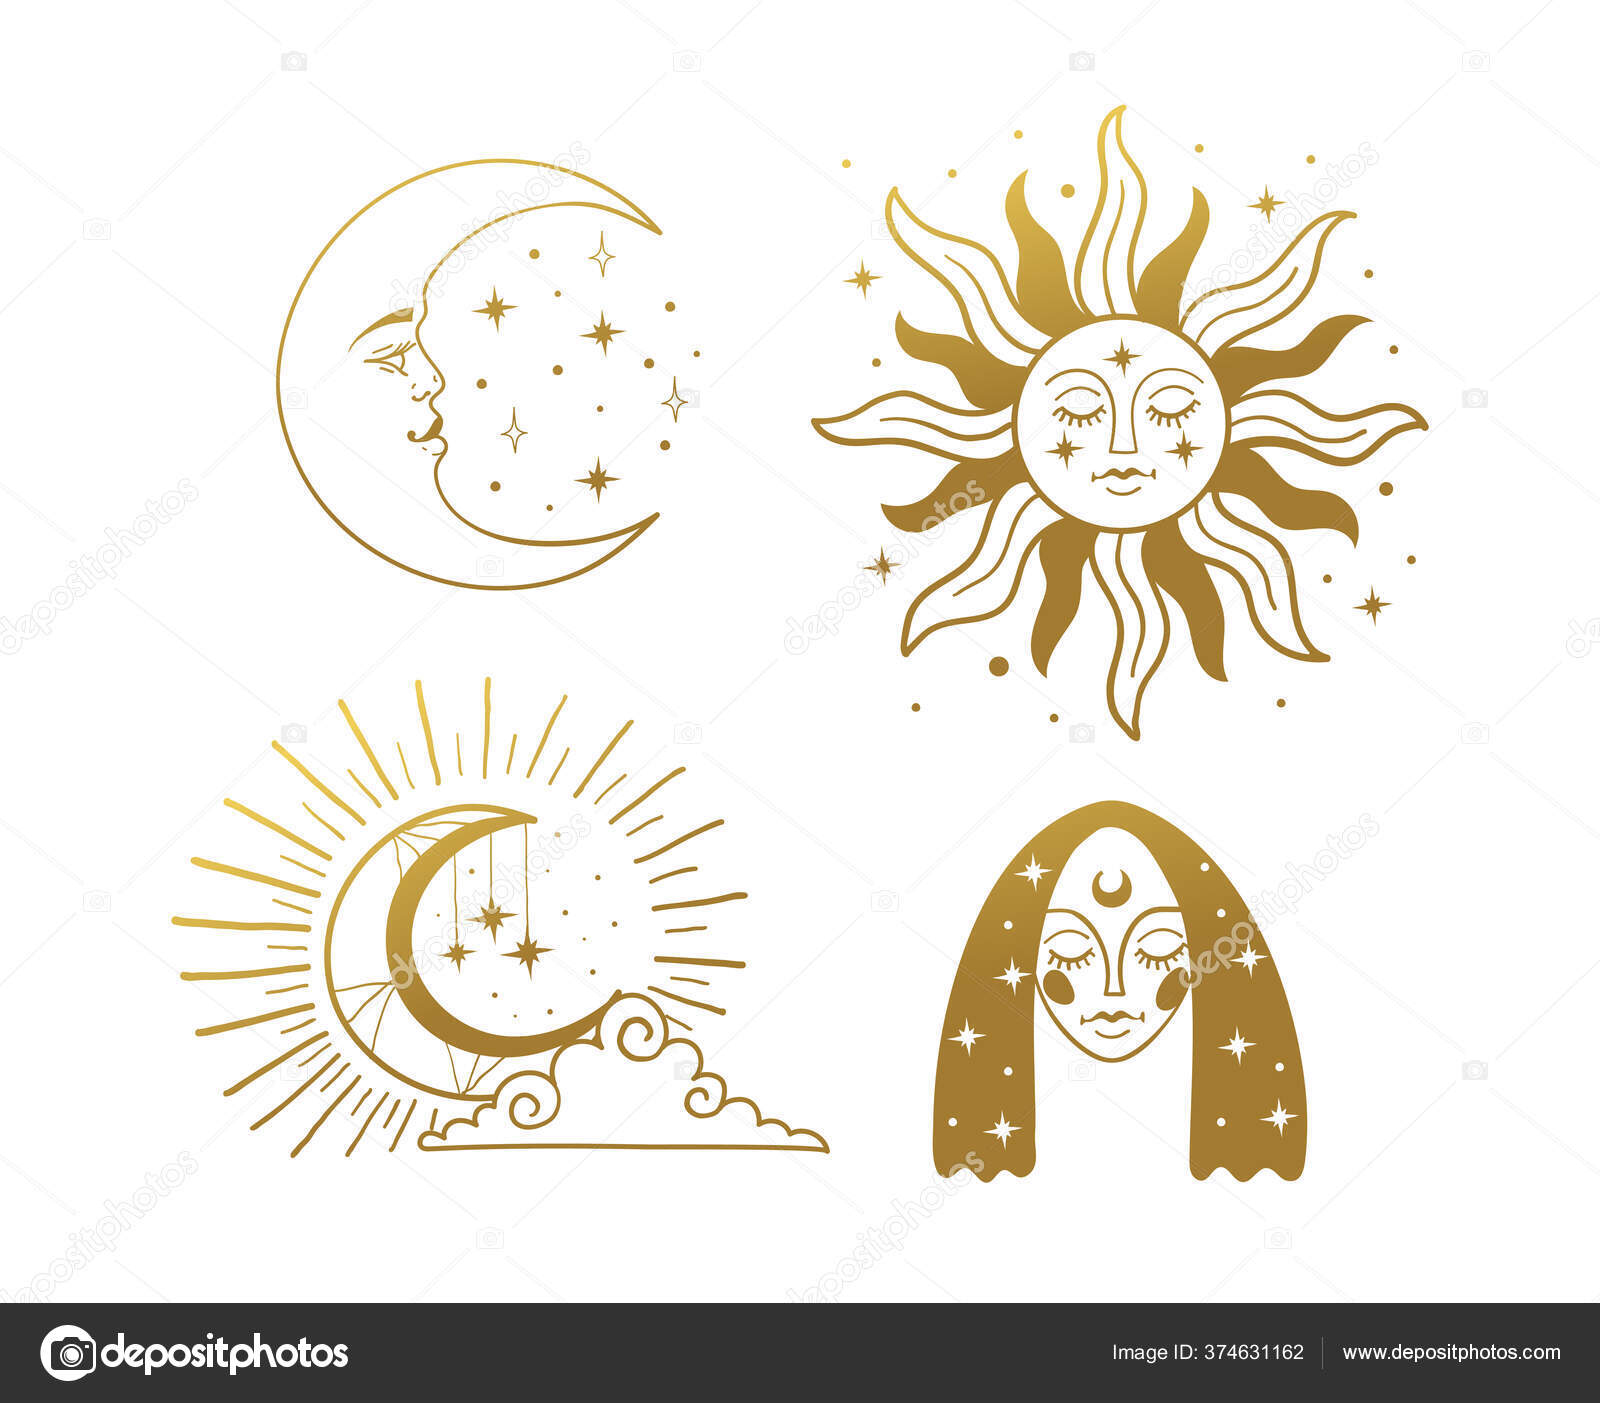 Sun And Moon Drawing - How To Draw A Sun And Moon Step By Step